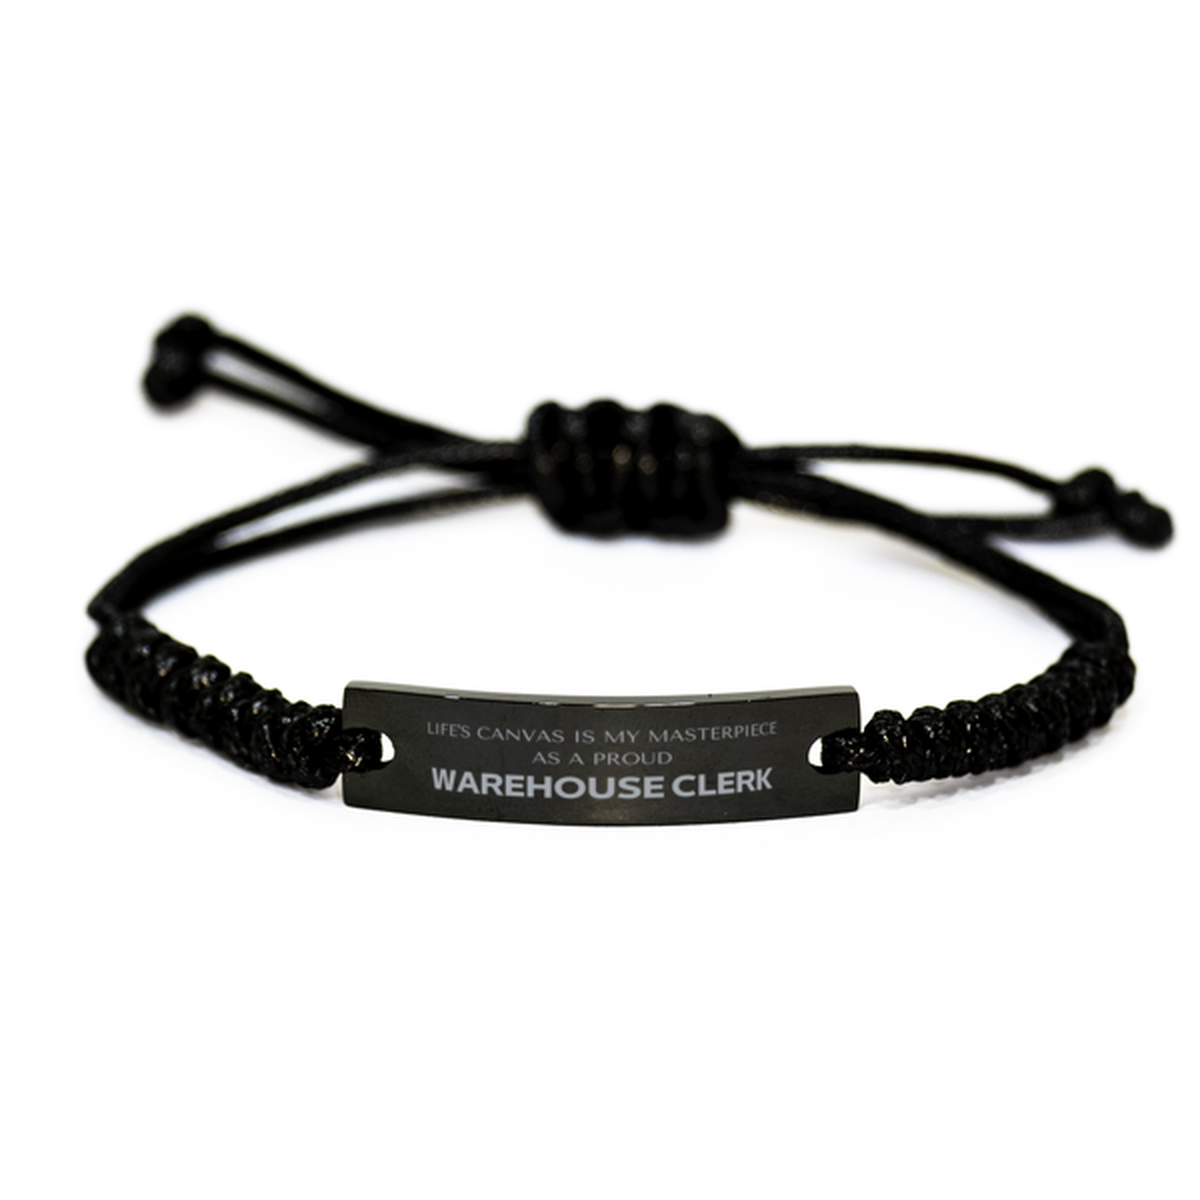 Proud Warehouse Clerk Gifts, Life's canvas is my masterpiece, Epic Birthday Christmas Unique Black Rope Bracelet For Warehouse Clerk, Coworkers, Men, Women, Friends